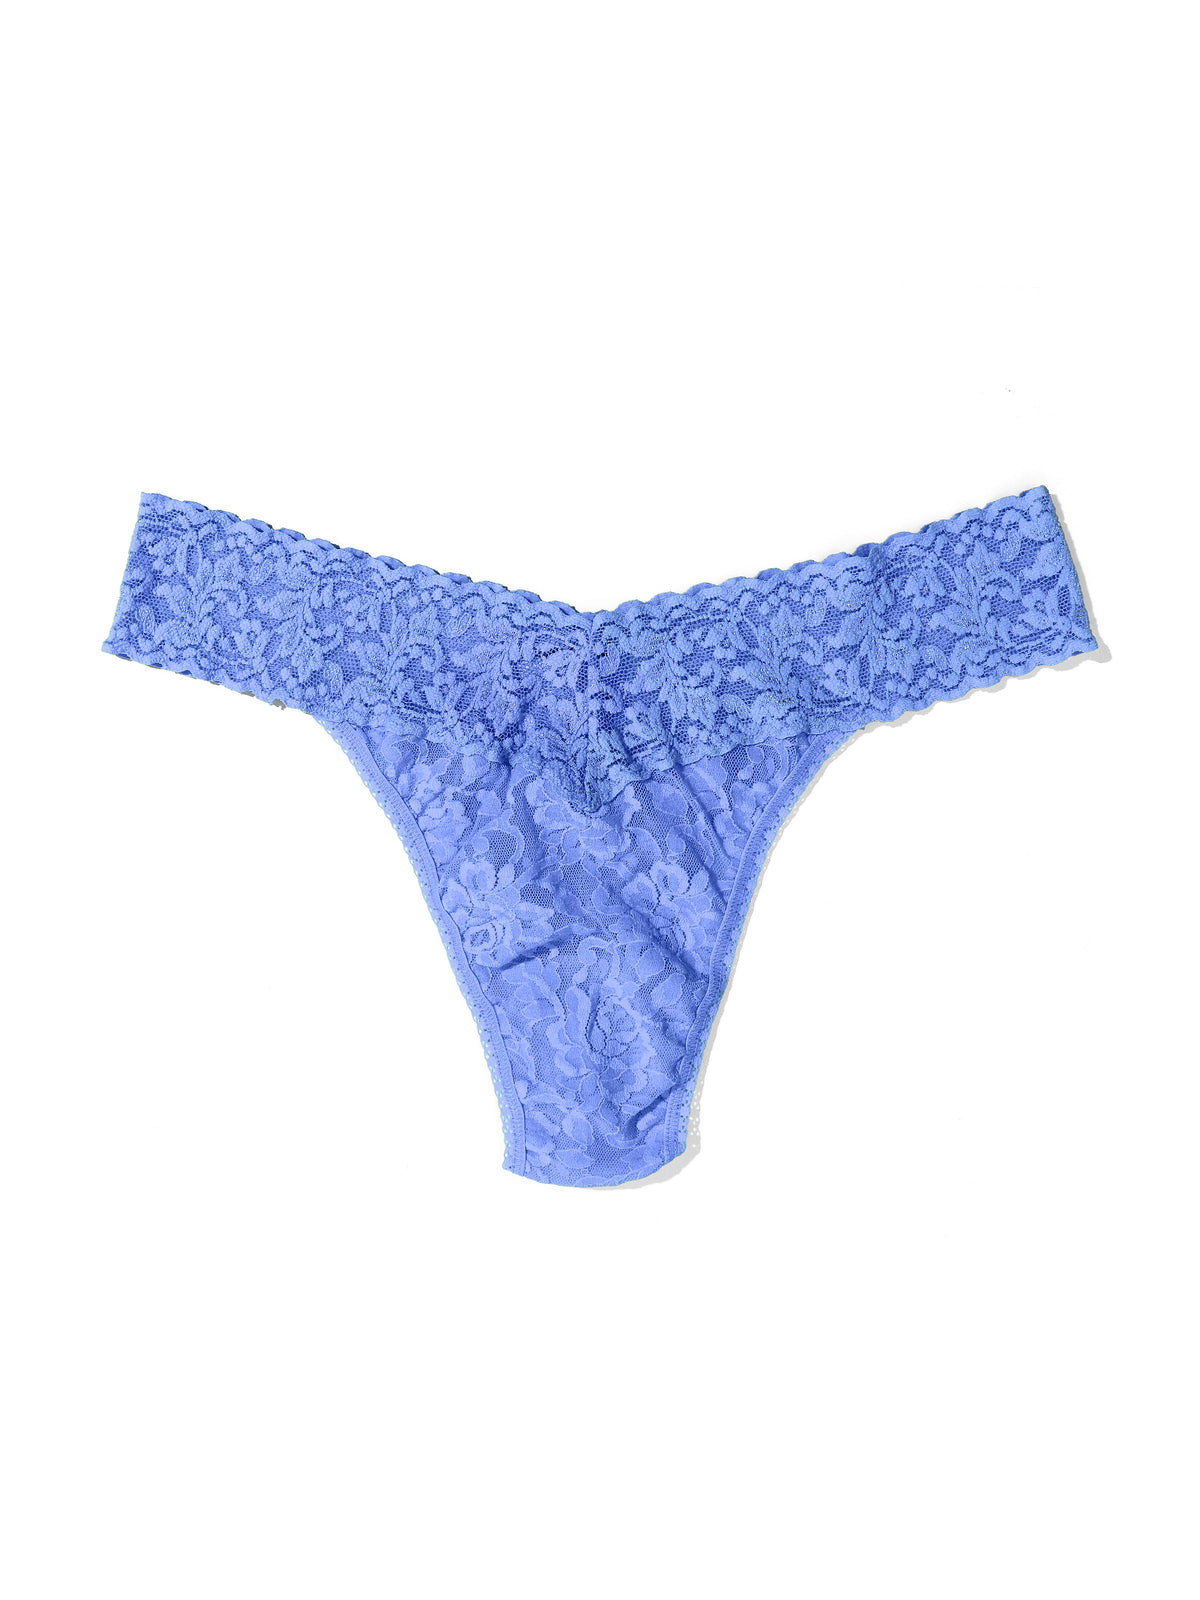 Signature Lace Original Rise Thong Forget Me Not Blue | Hanky Panky